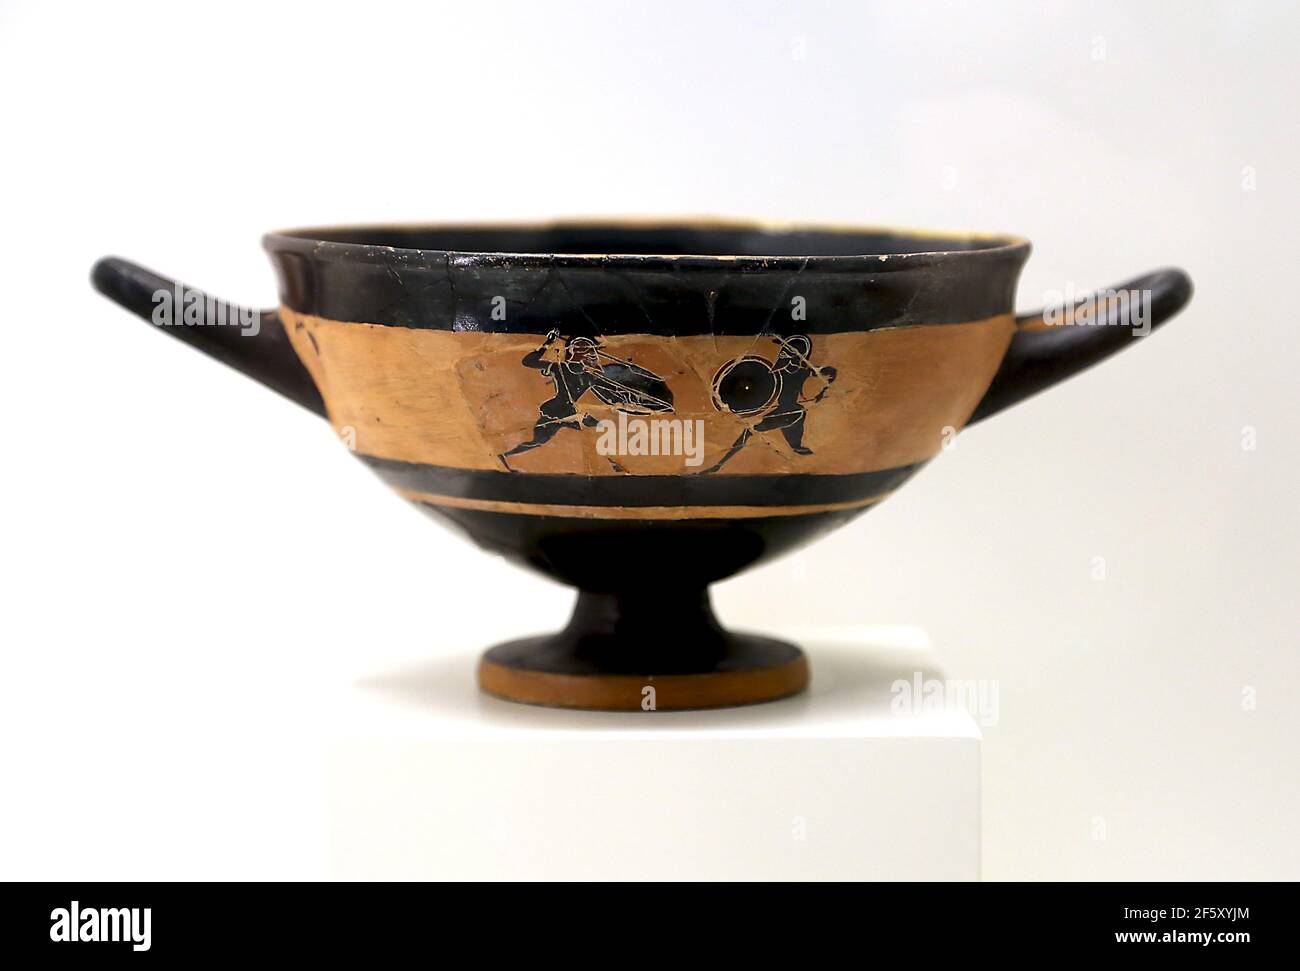 Cup with combat scene. Black figure pottery, Attic worK, 4th cent. BC. Empuries, Archaeology Museum of Catalonia. Barcelona, Spain. Stock Photo